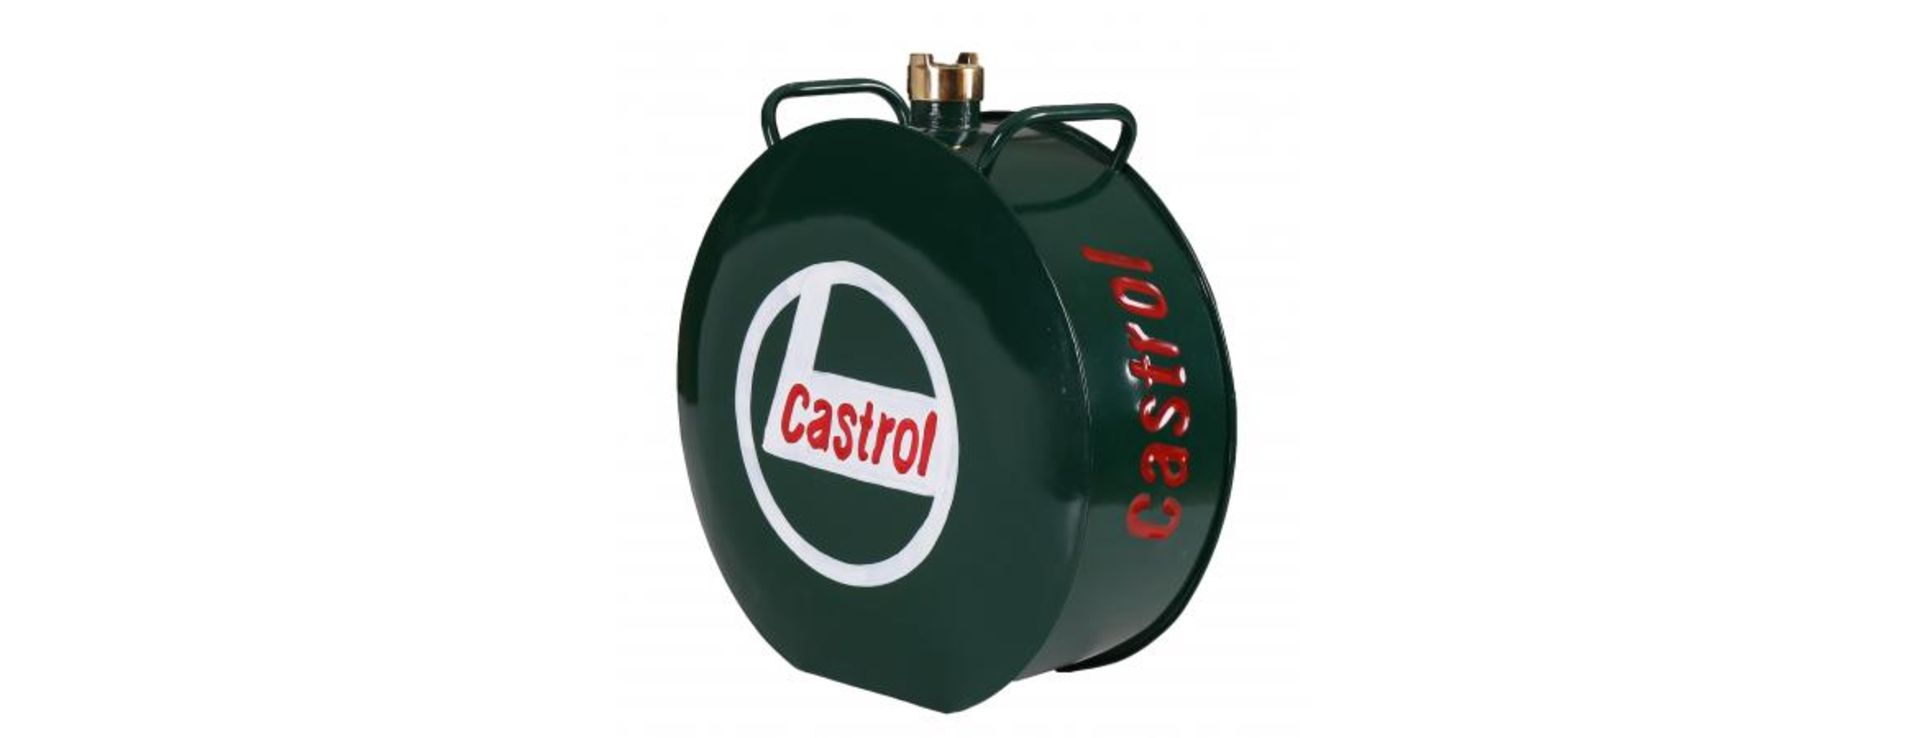 Castrol Round Oil Can